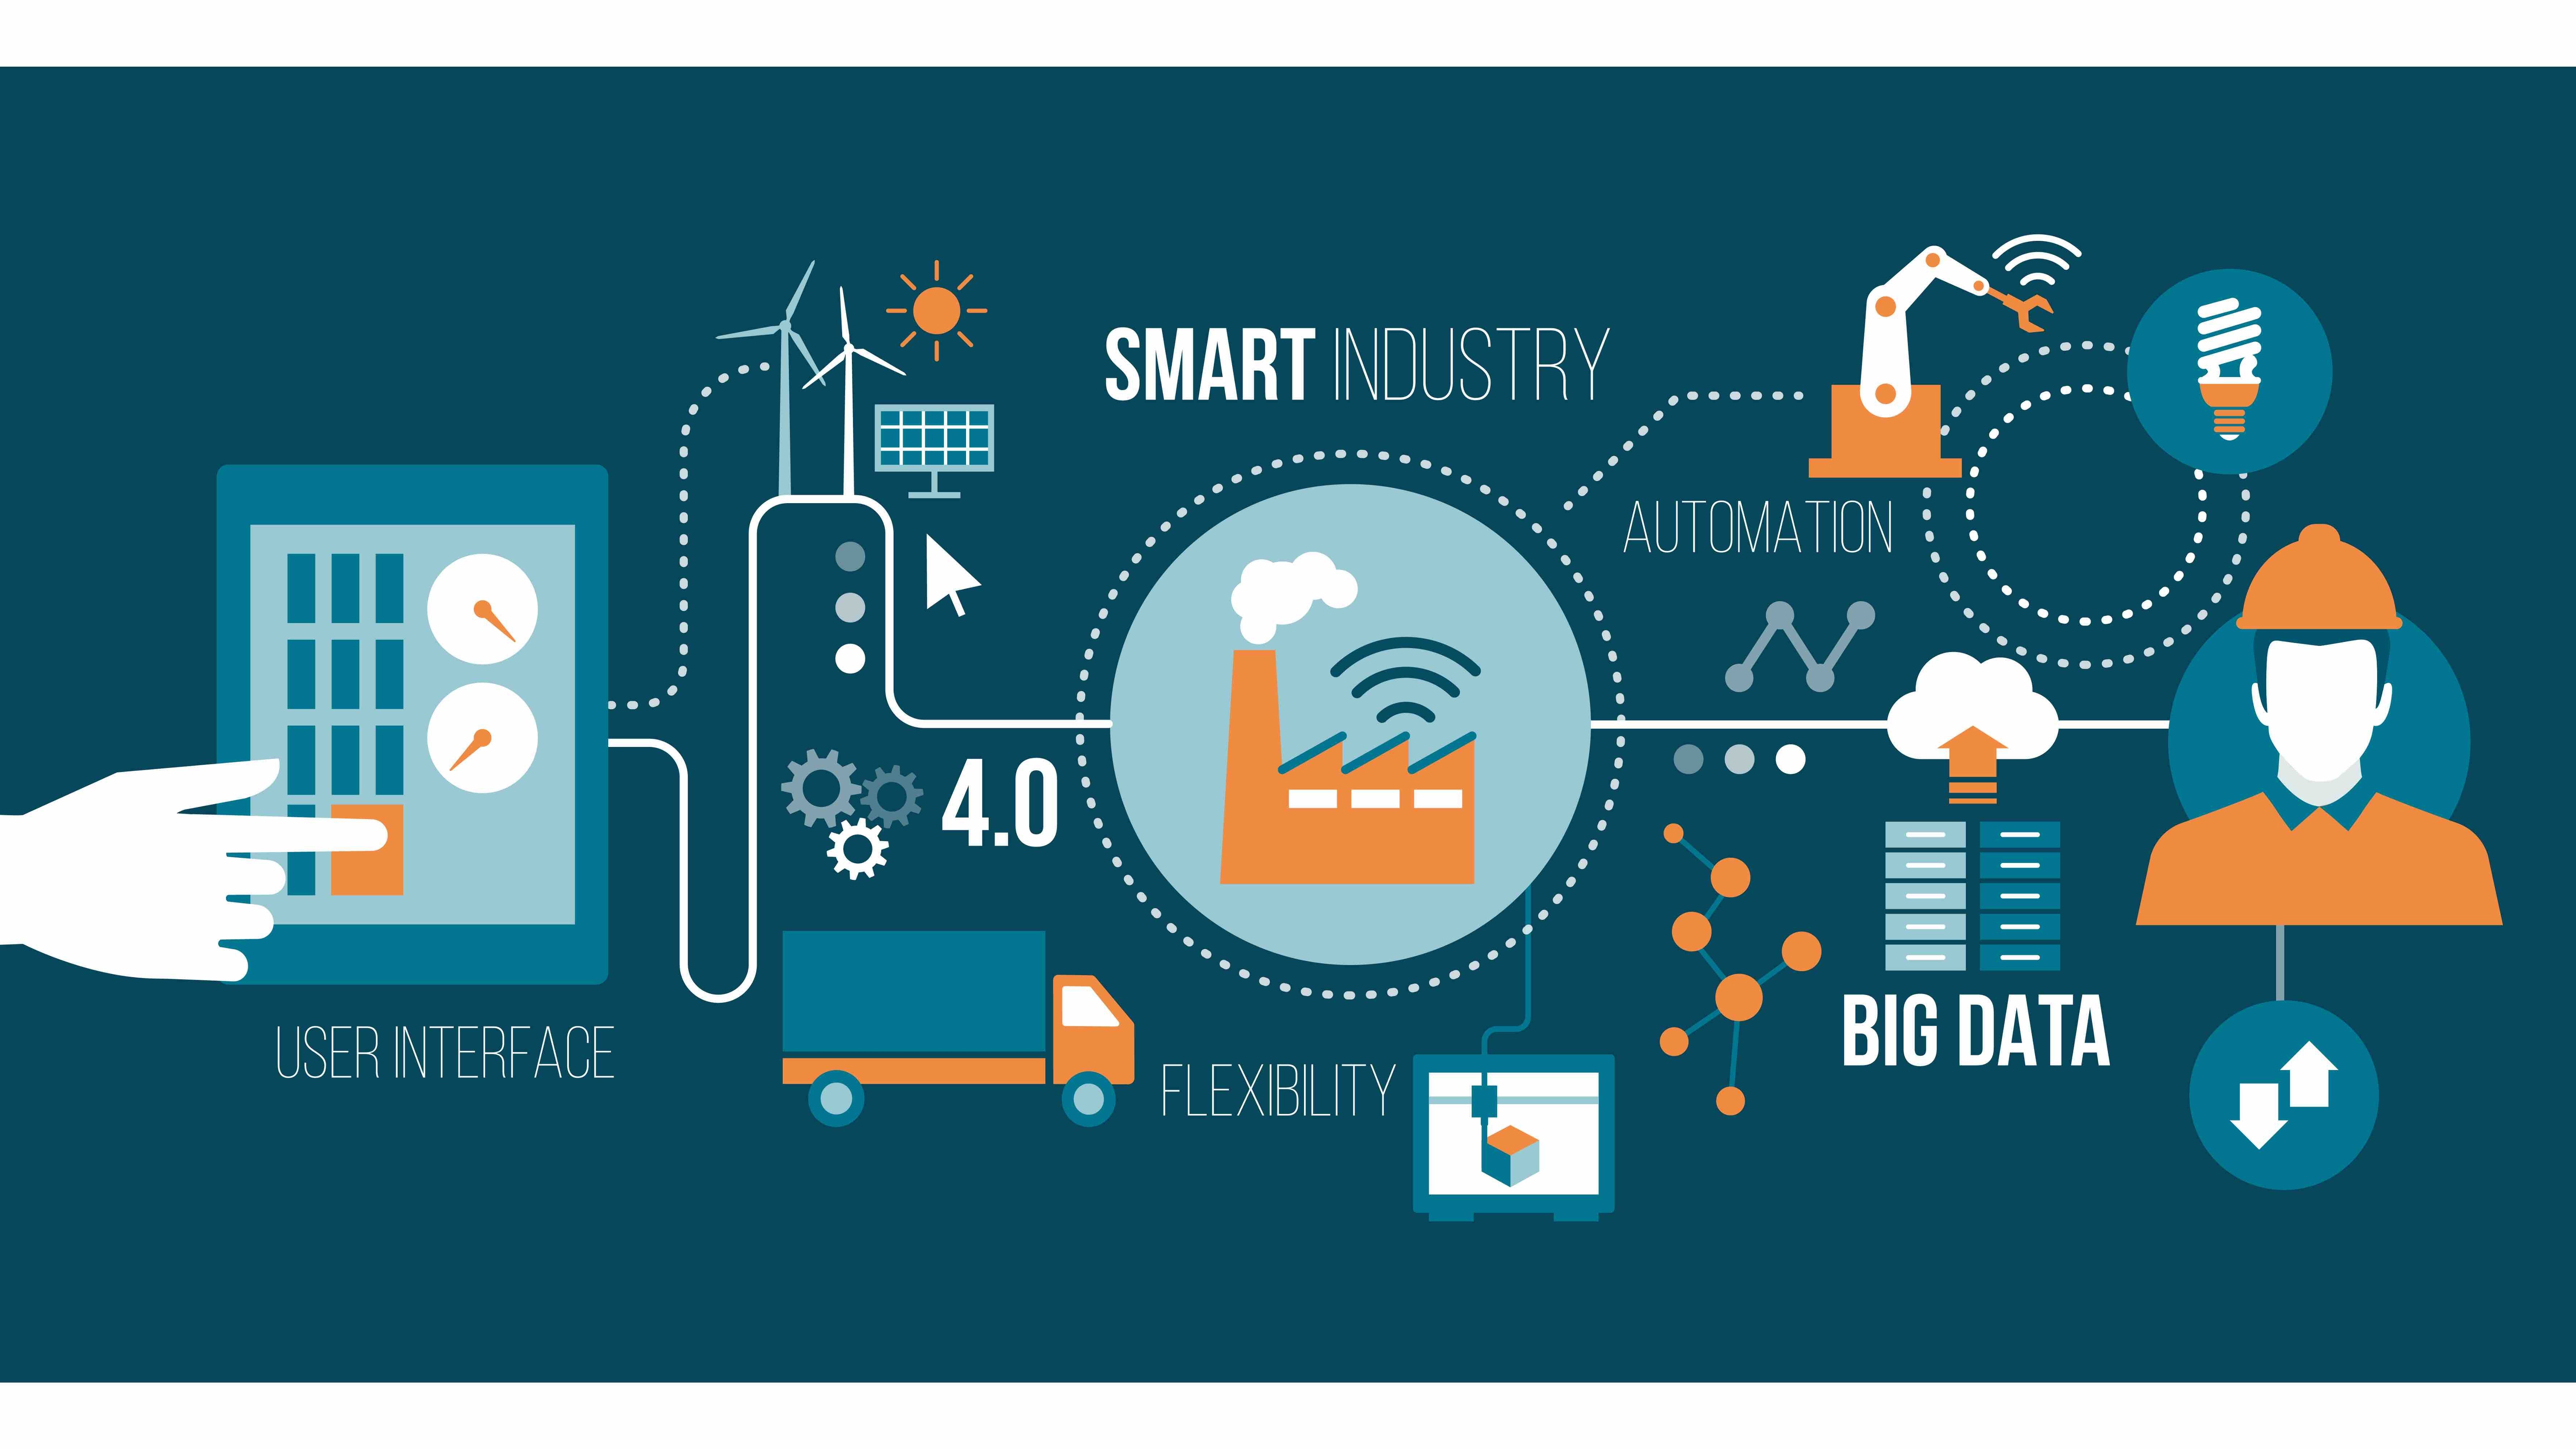 Partnerships and ecosystems in industrial IoT